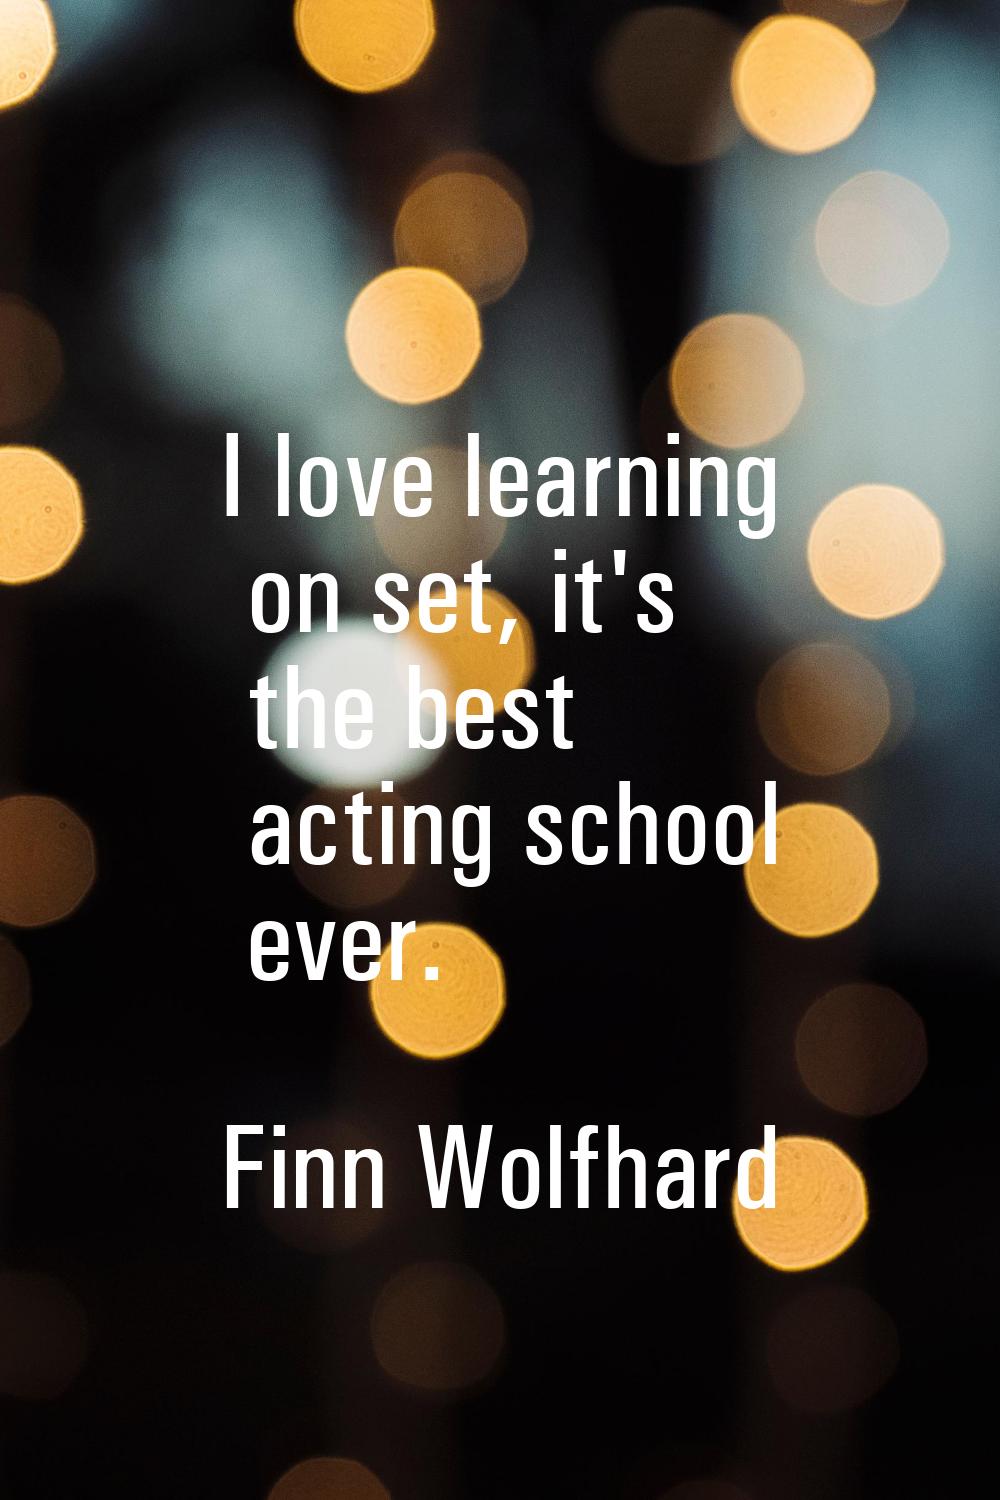 I love learning on set, it's the best acting school ever.